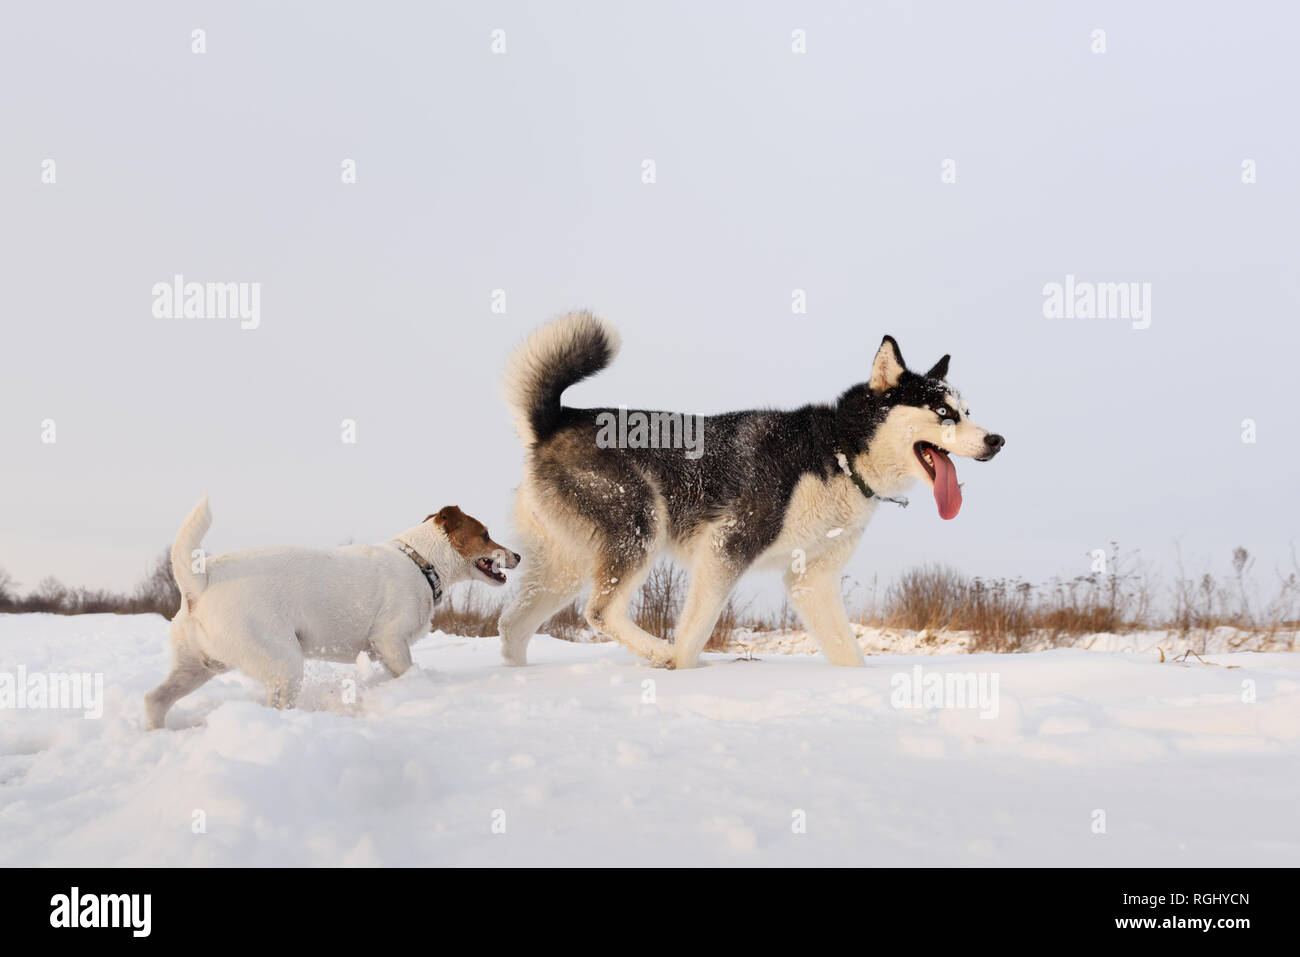 Siberian husky and jack russel terrier dogs playing on winter field. Happy puppys in fluffy snow. Animal photography Stock Photo